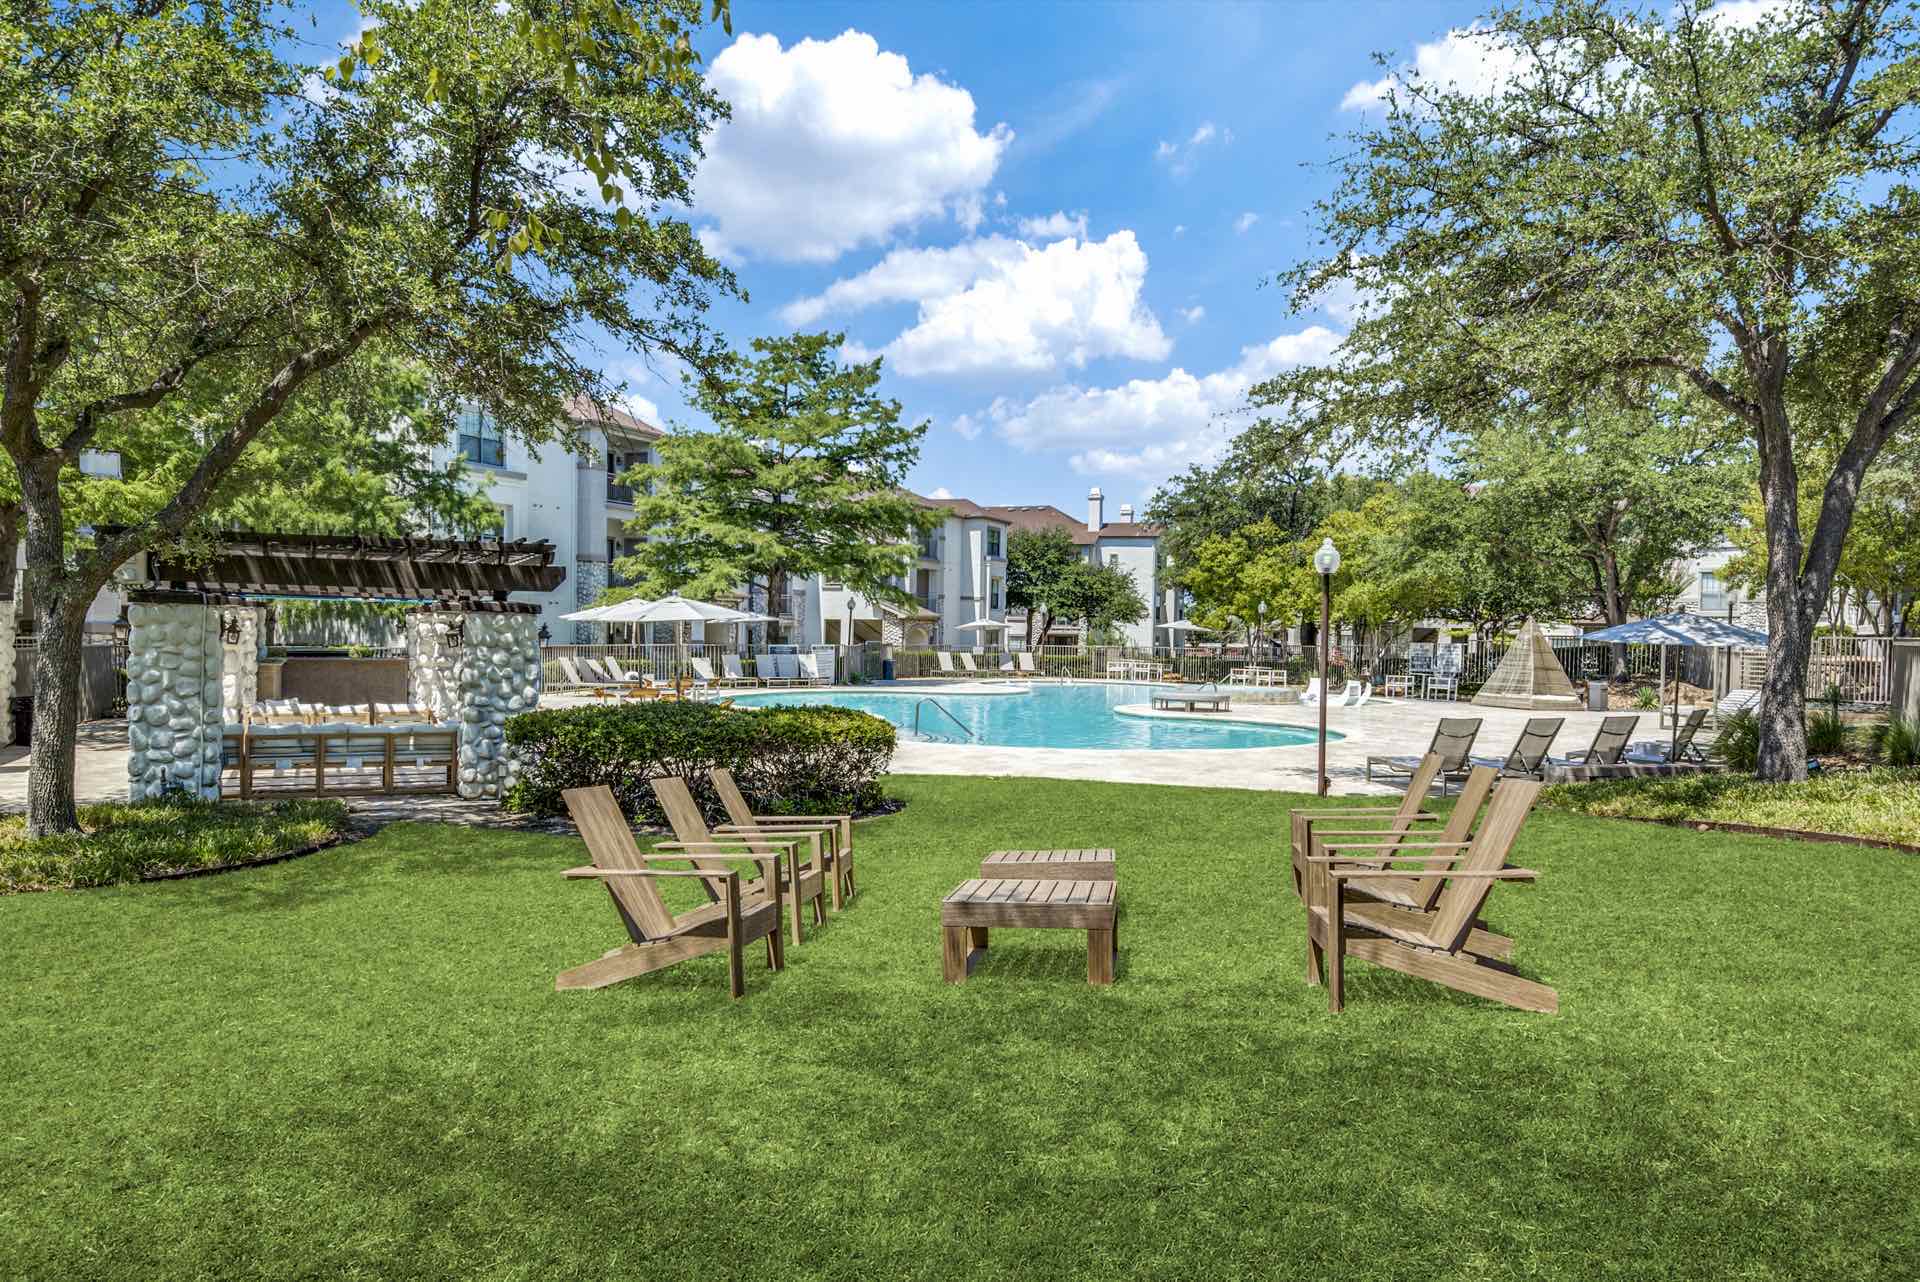 Lawn by pool with Adirondack chairs